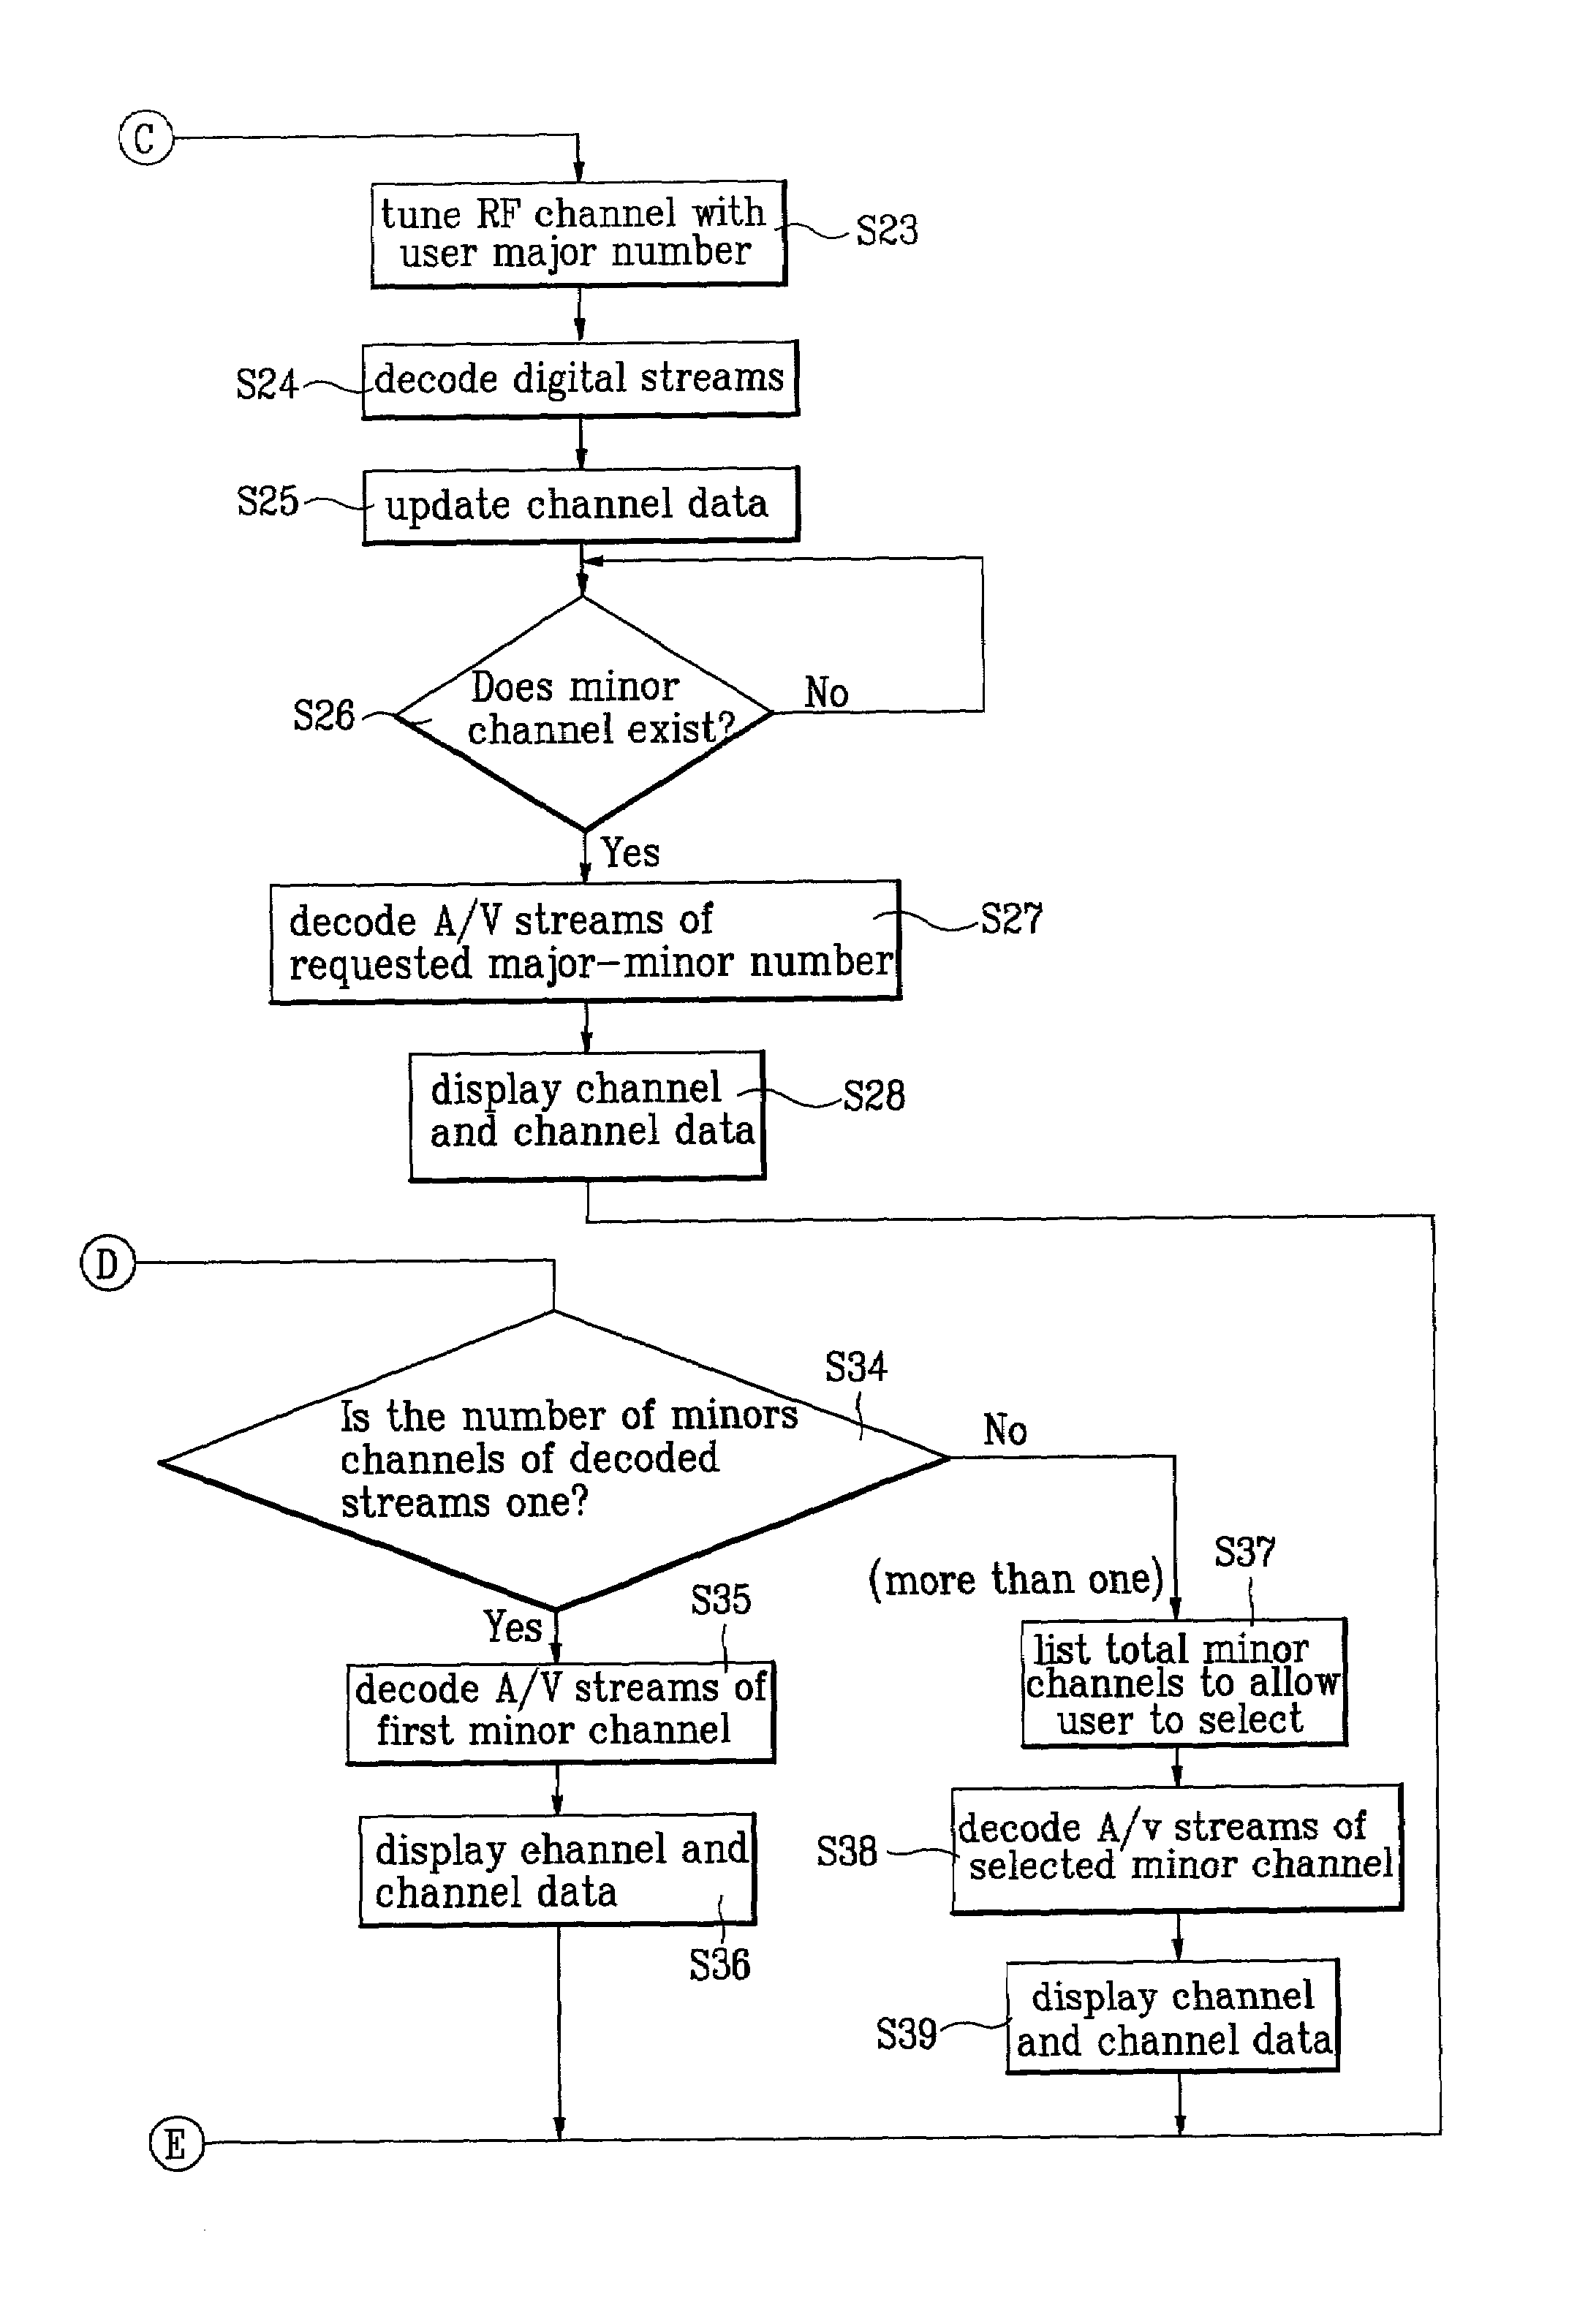 Method for controlling channel tuning of digital TV